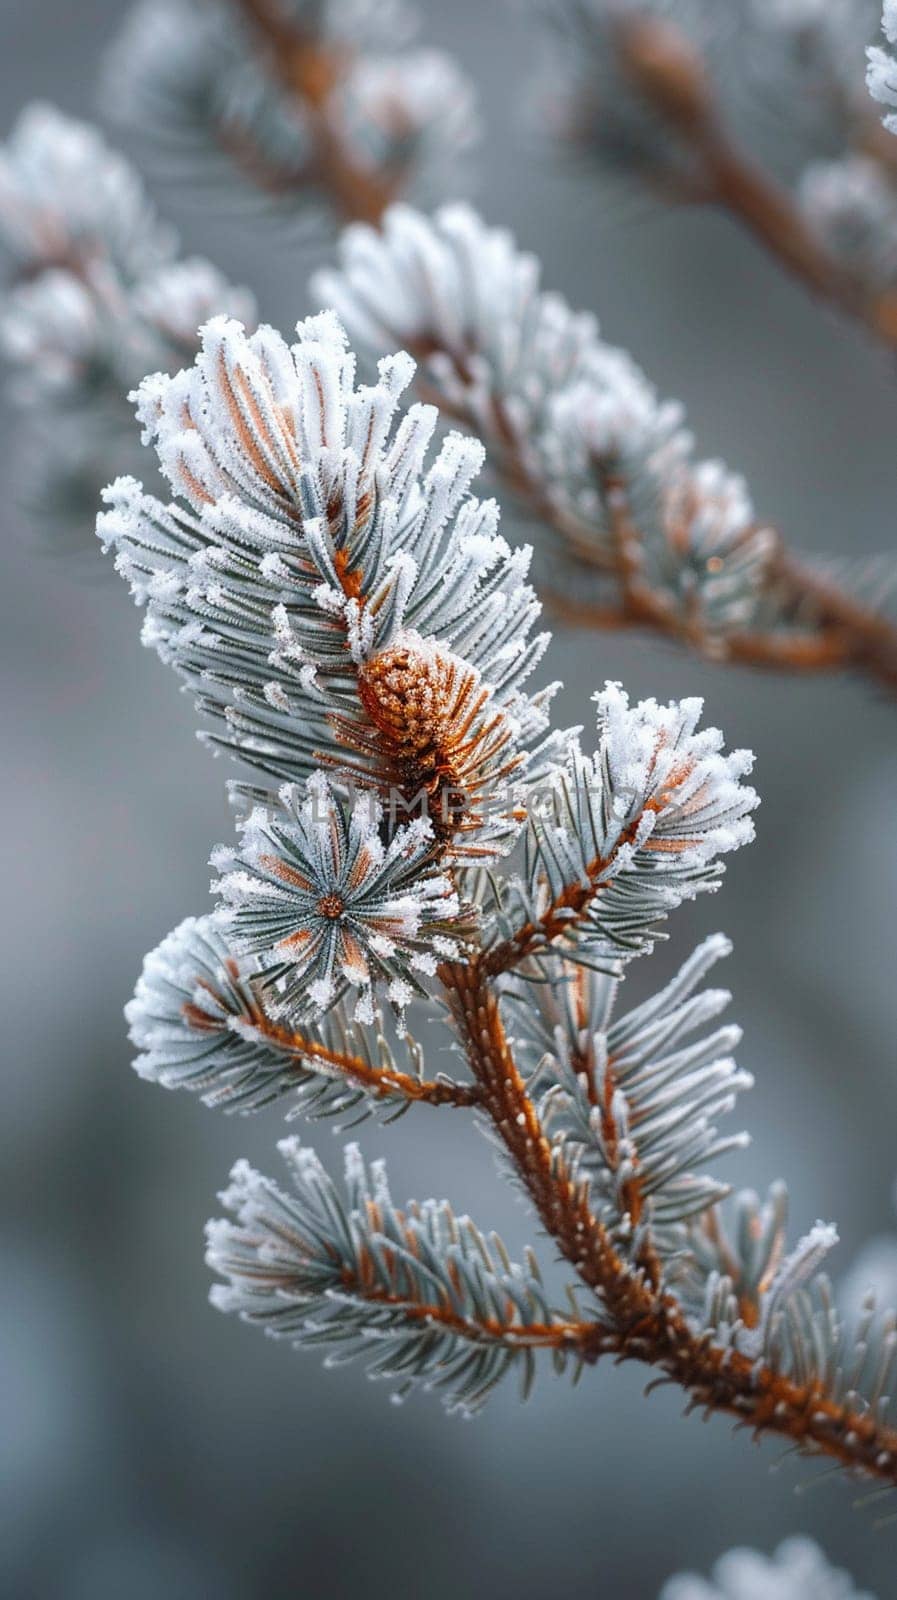 Freshly fallen snow on a pine branch, representing winter's purity and calm.